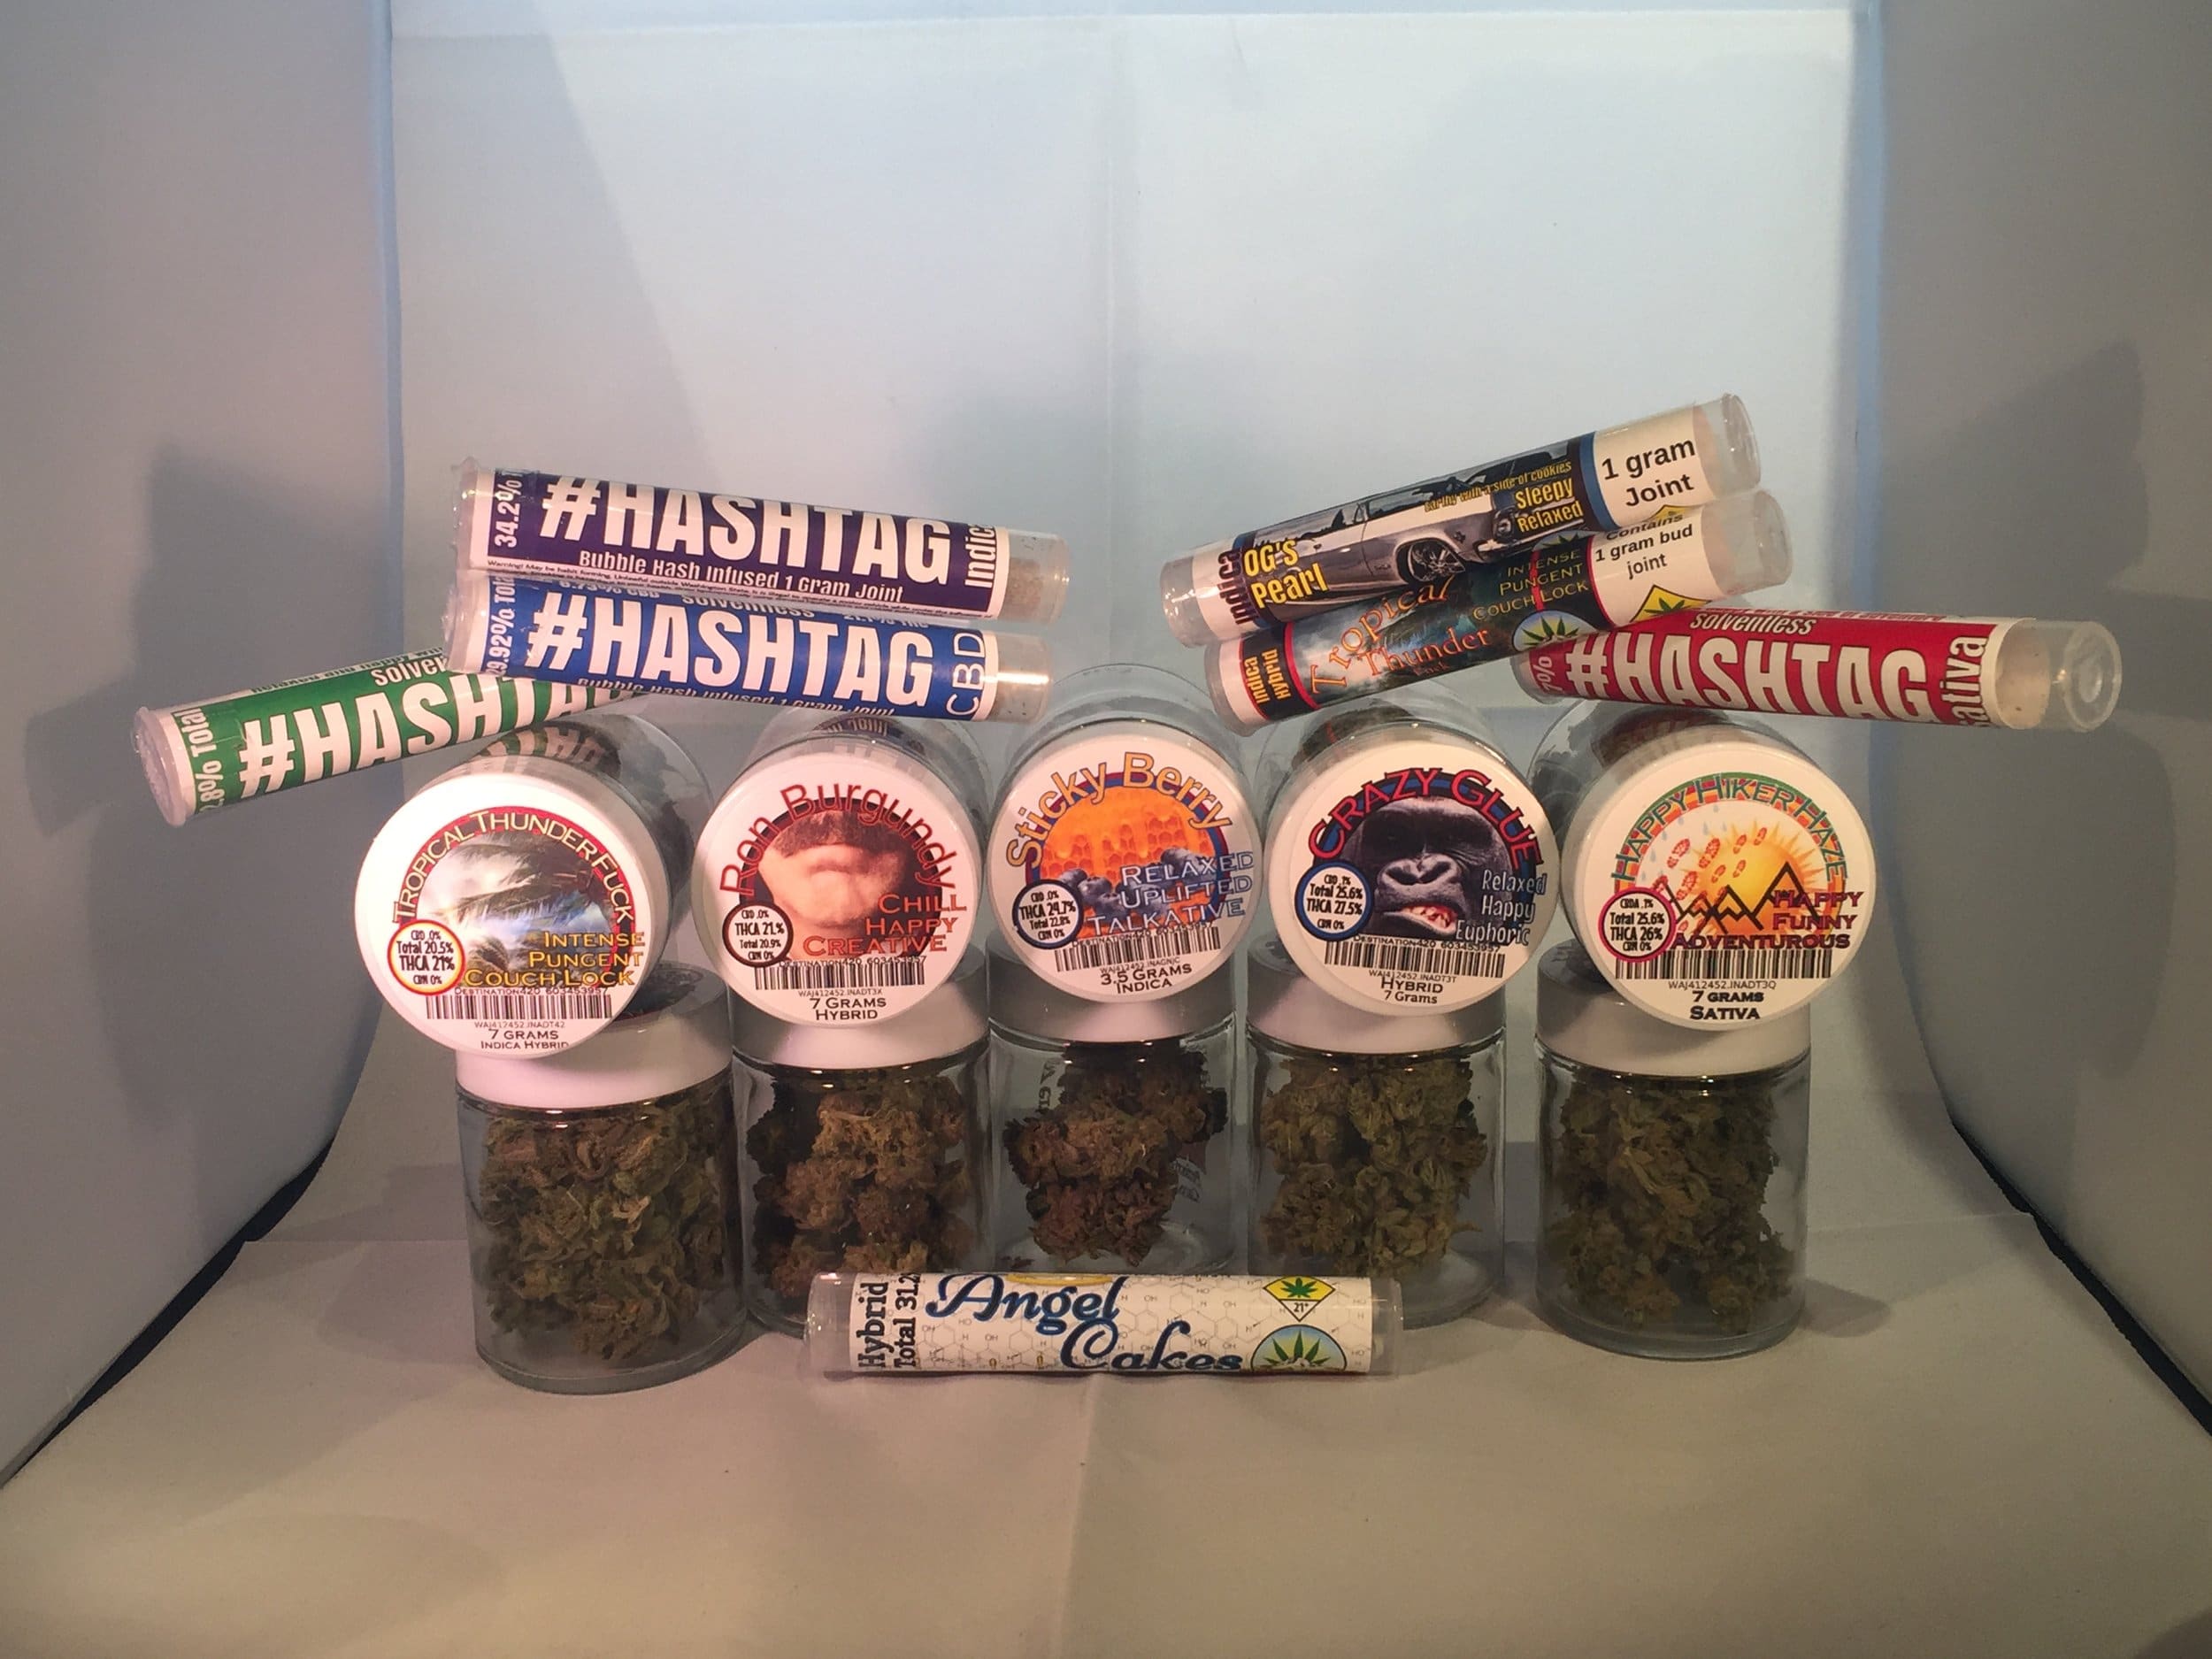 These are some of the smokeable marijuana products that are produced by Hazy Daze Growers. Hazy Daze’s newest product in this picture are the #Hashtag Infused Joints. #Hashtag infused joints contain flower and BHO.